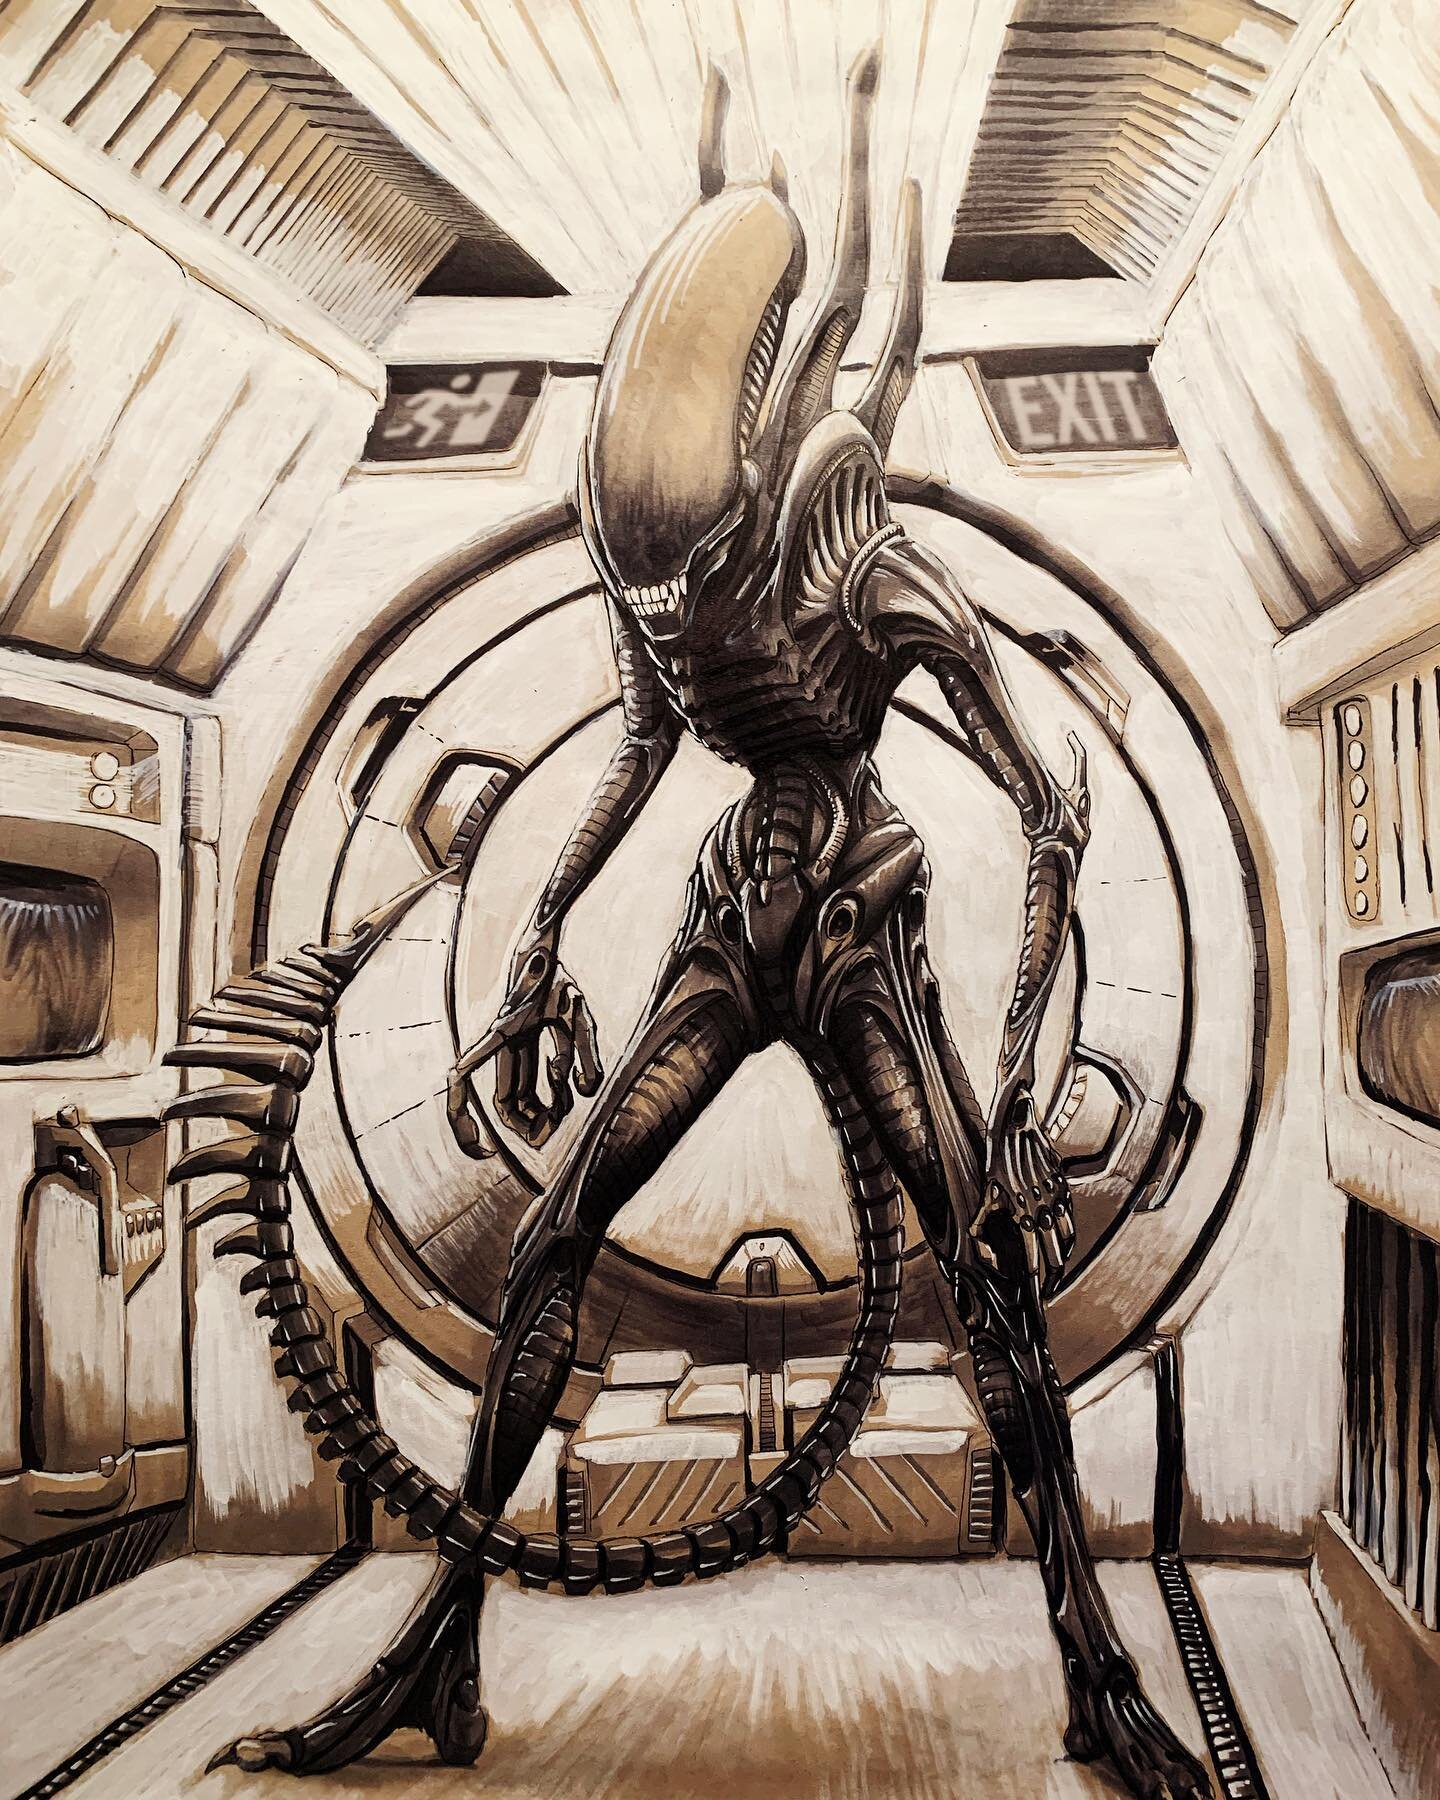 Arguably the best creature design ever. Alien changed everything. Easily earned its place on my shortlist of annual viewings. 

Arriving fashionably late to alien day - I pushed my abilities on this one but gave myself the time I needed. Let me know 